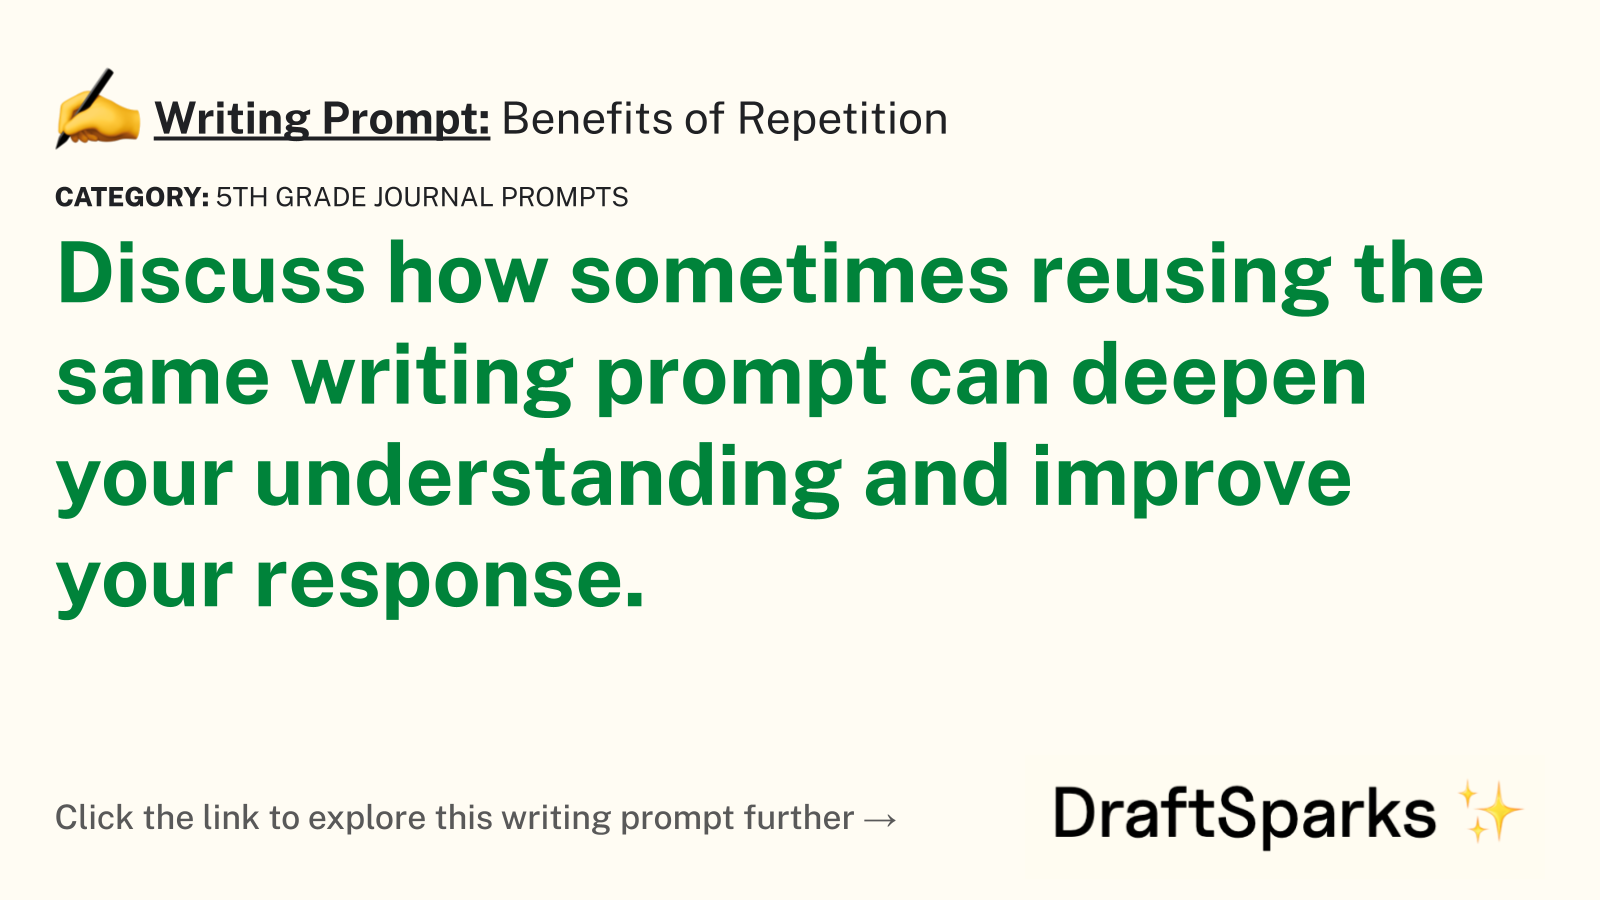 Benefits of Repetition